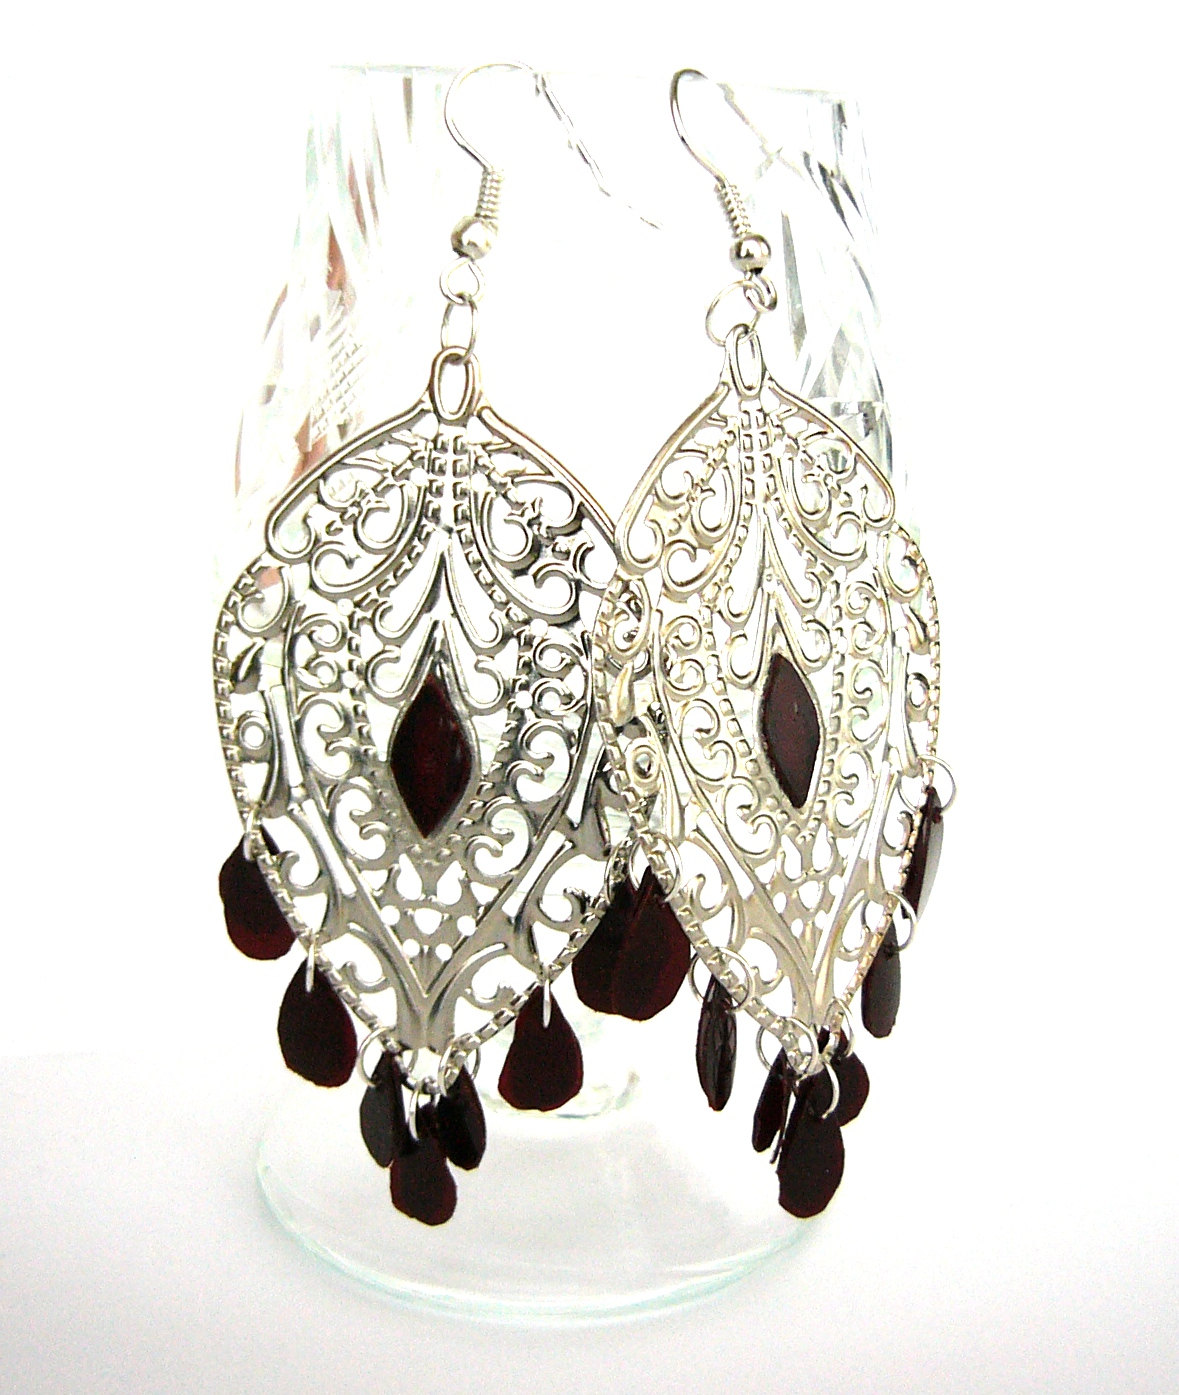 Red Filigree Chandelier Earrings Decorated With Recycled Plastic - Upcycled Jewelry, Eco-friendly, Gypsy, Boho, Long Earrings